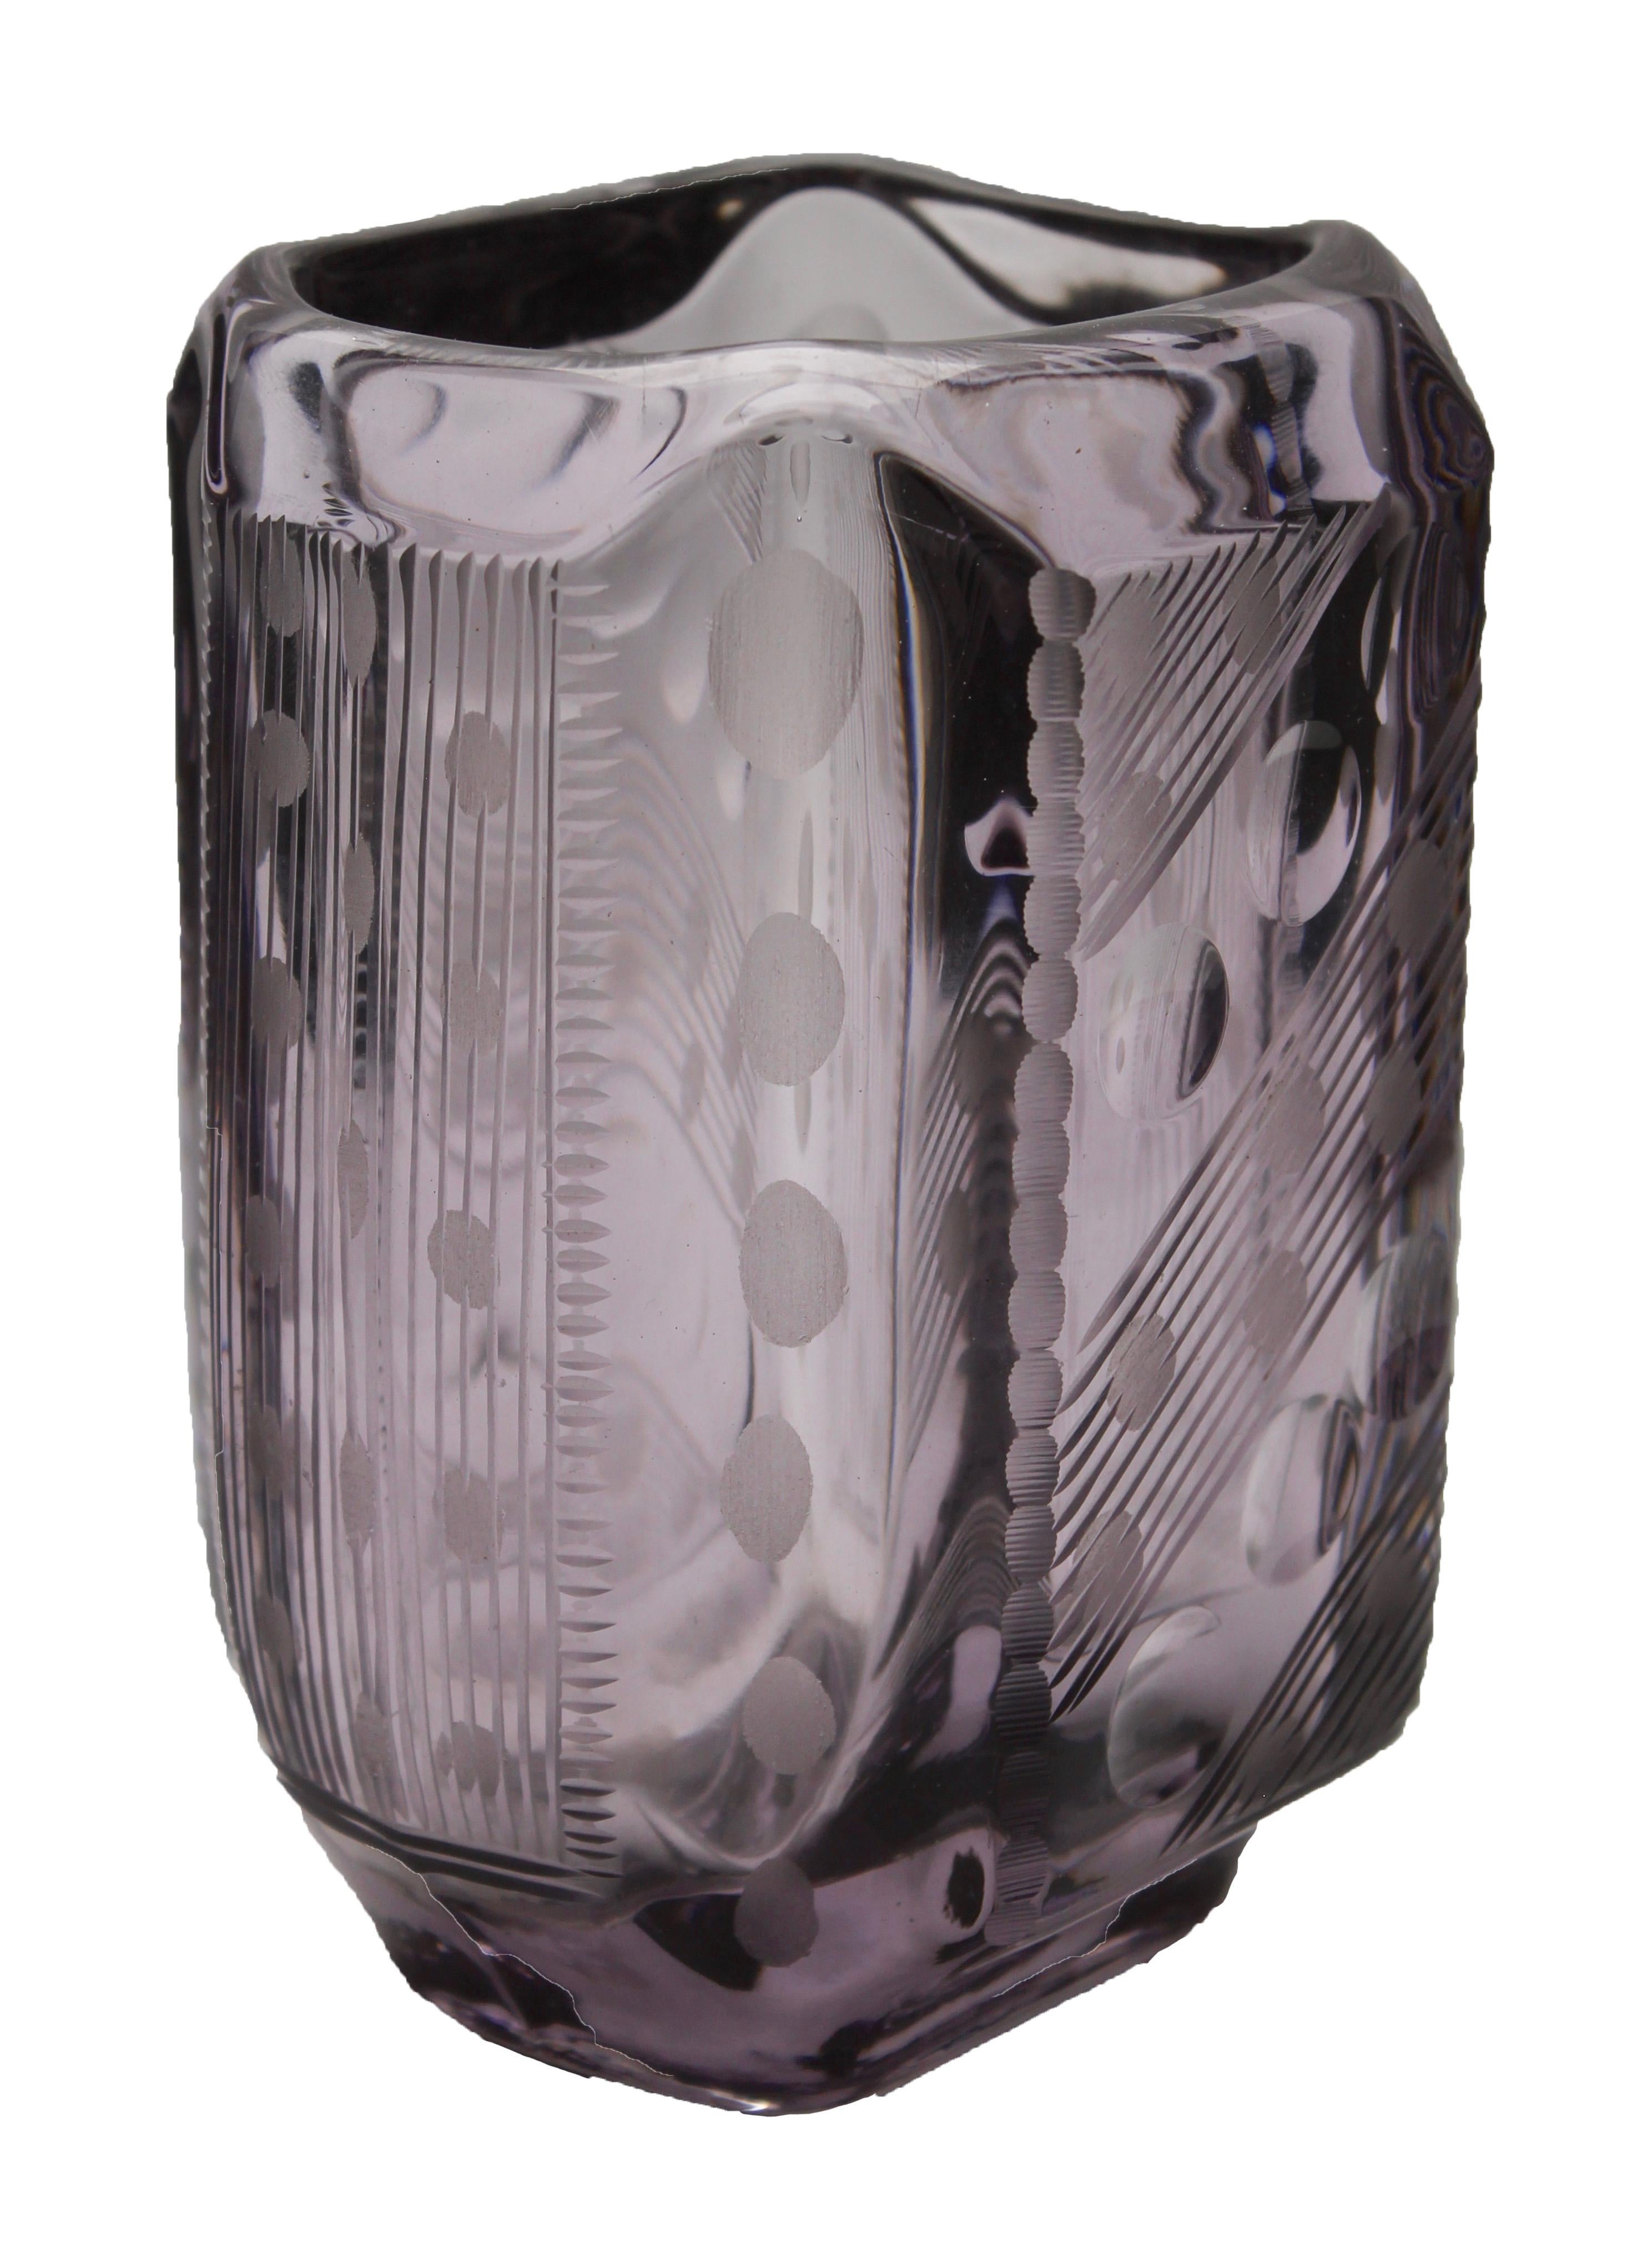 A beautiful example of Postwar deco design and an early example of the developing Sklo style. This midcentury rectangular vase has been made in a light shade of amethyst on a raised foot, with abstract / geometric design engraved on the thick-walled